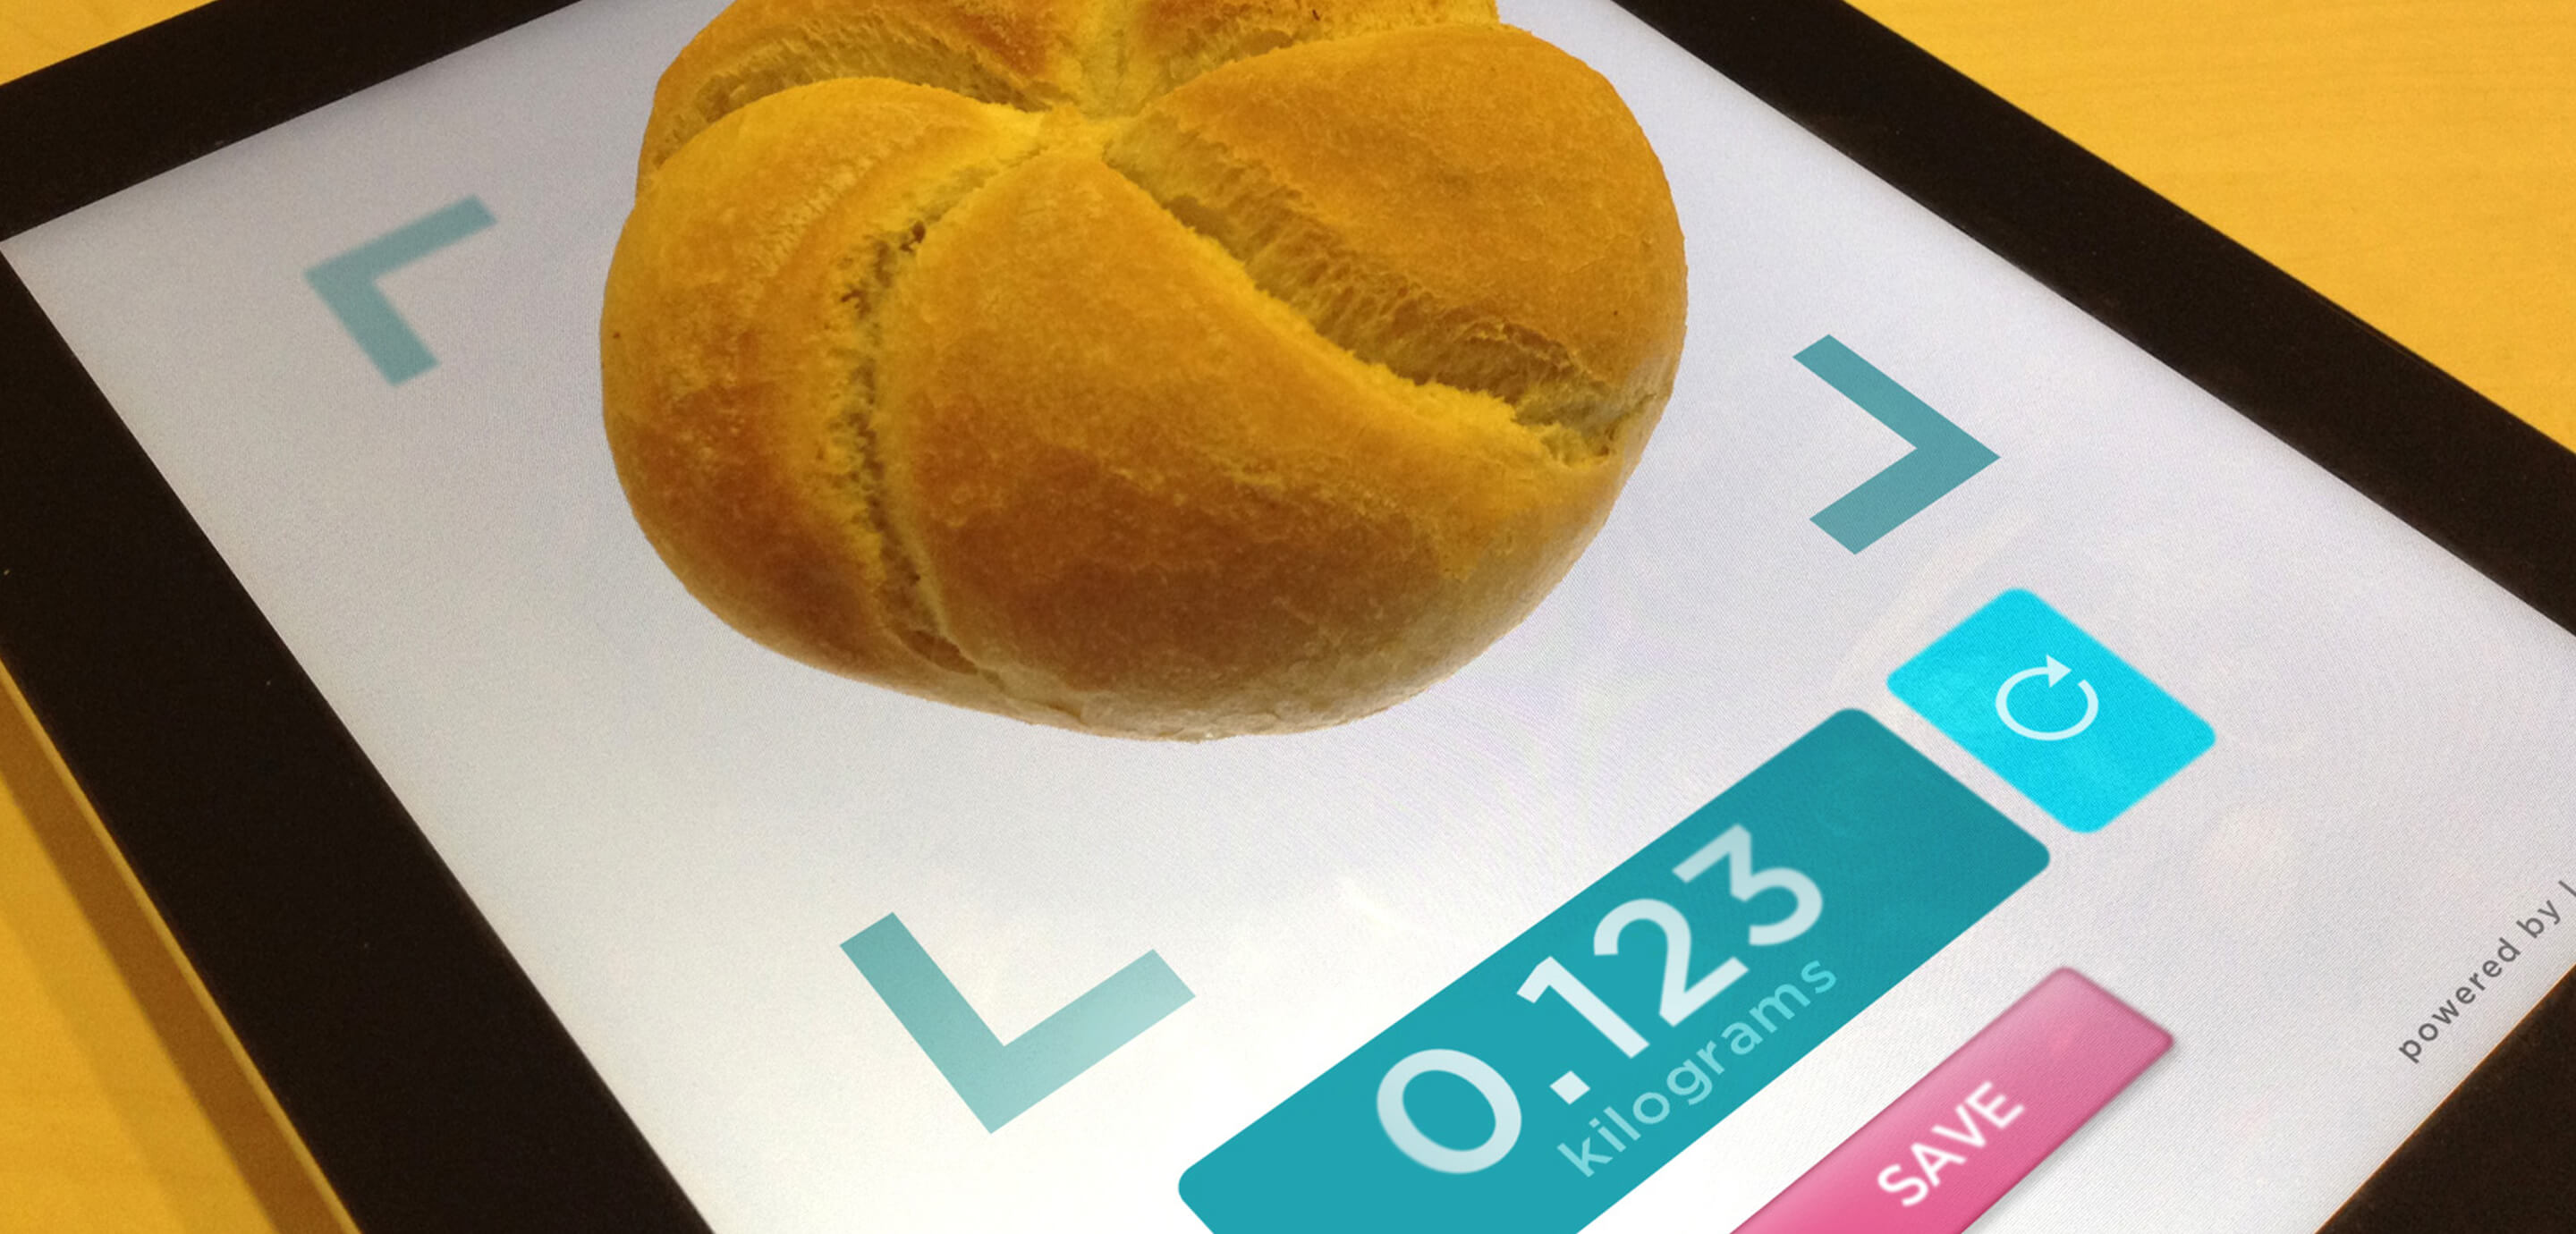 Office - Mures - Moderate, technology-powered pranks are the best: April Fools iOS device scale